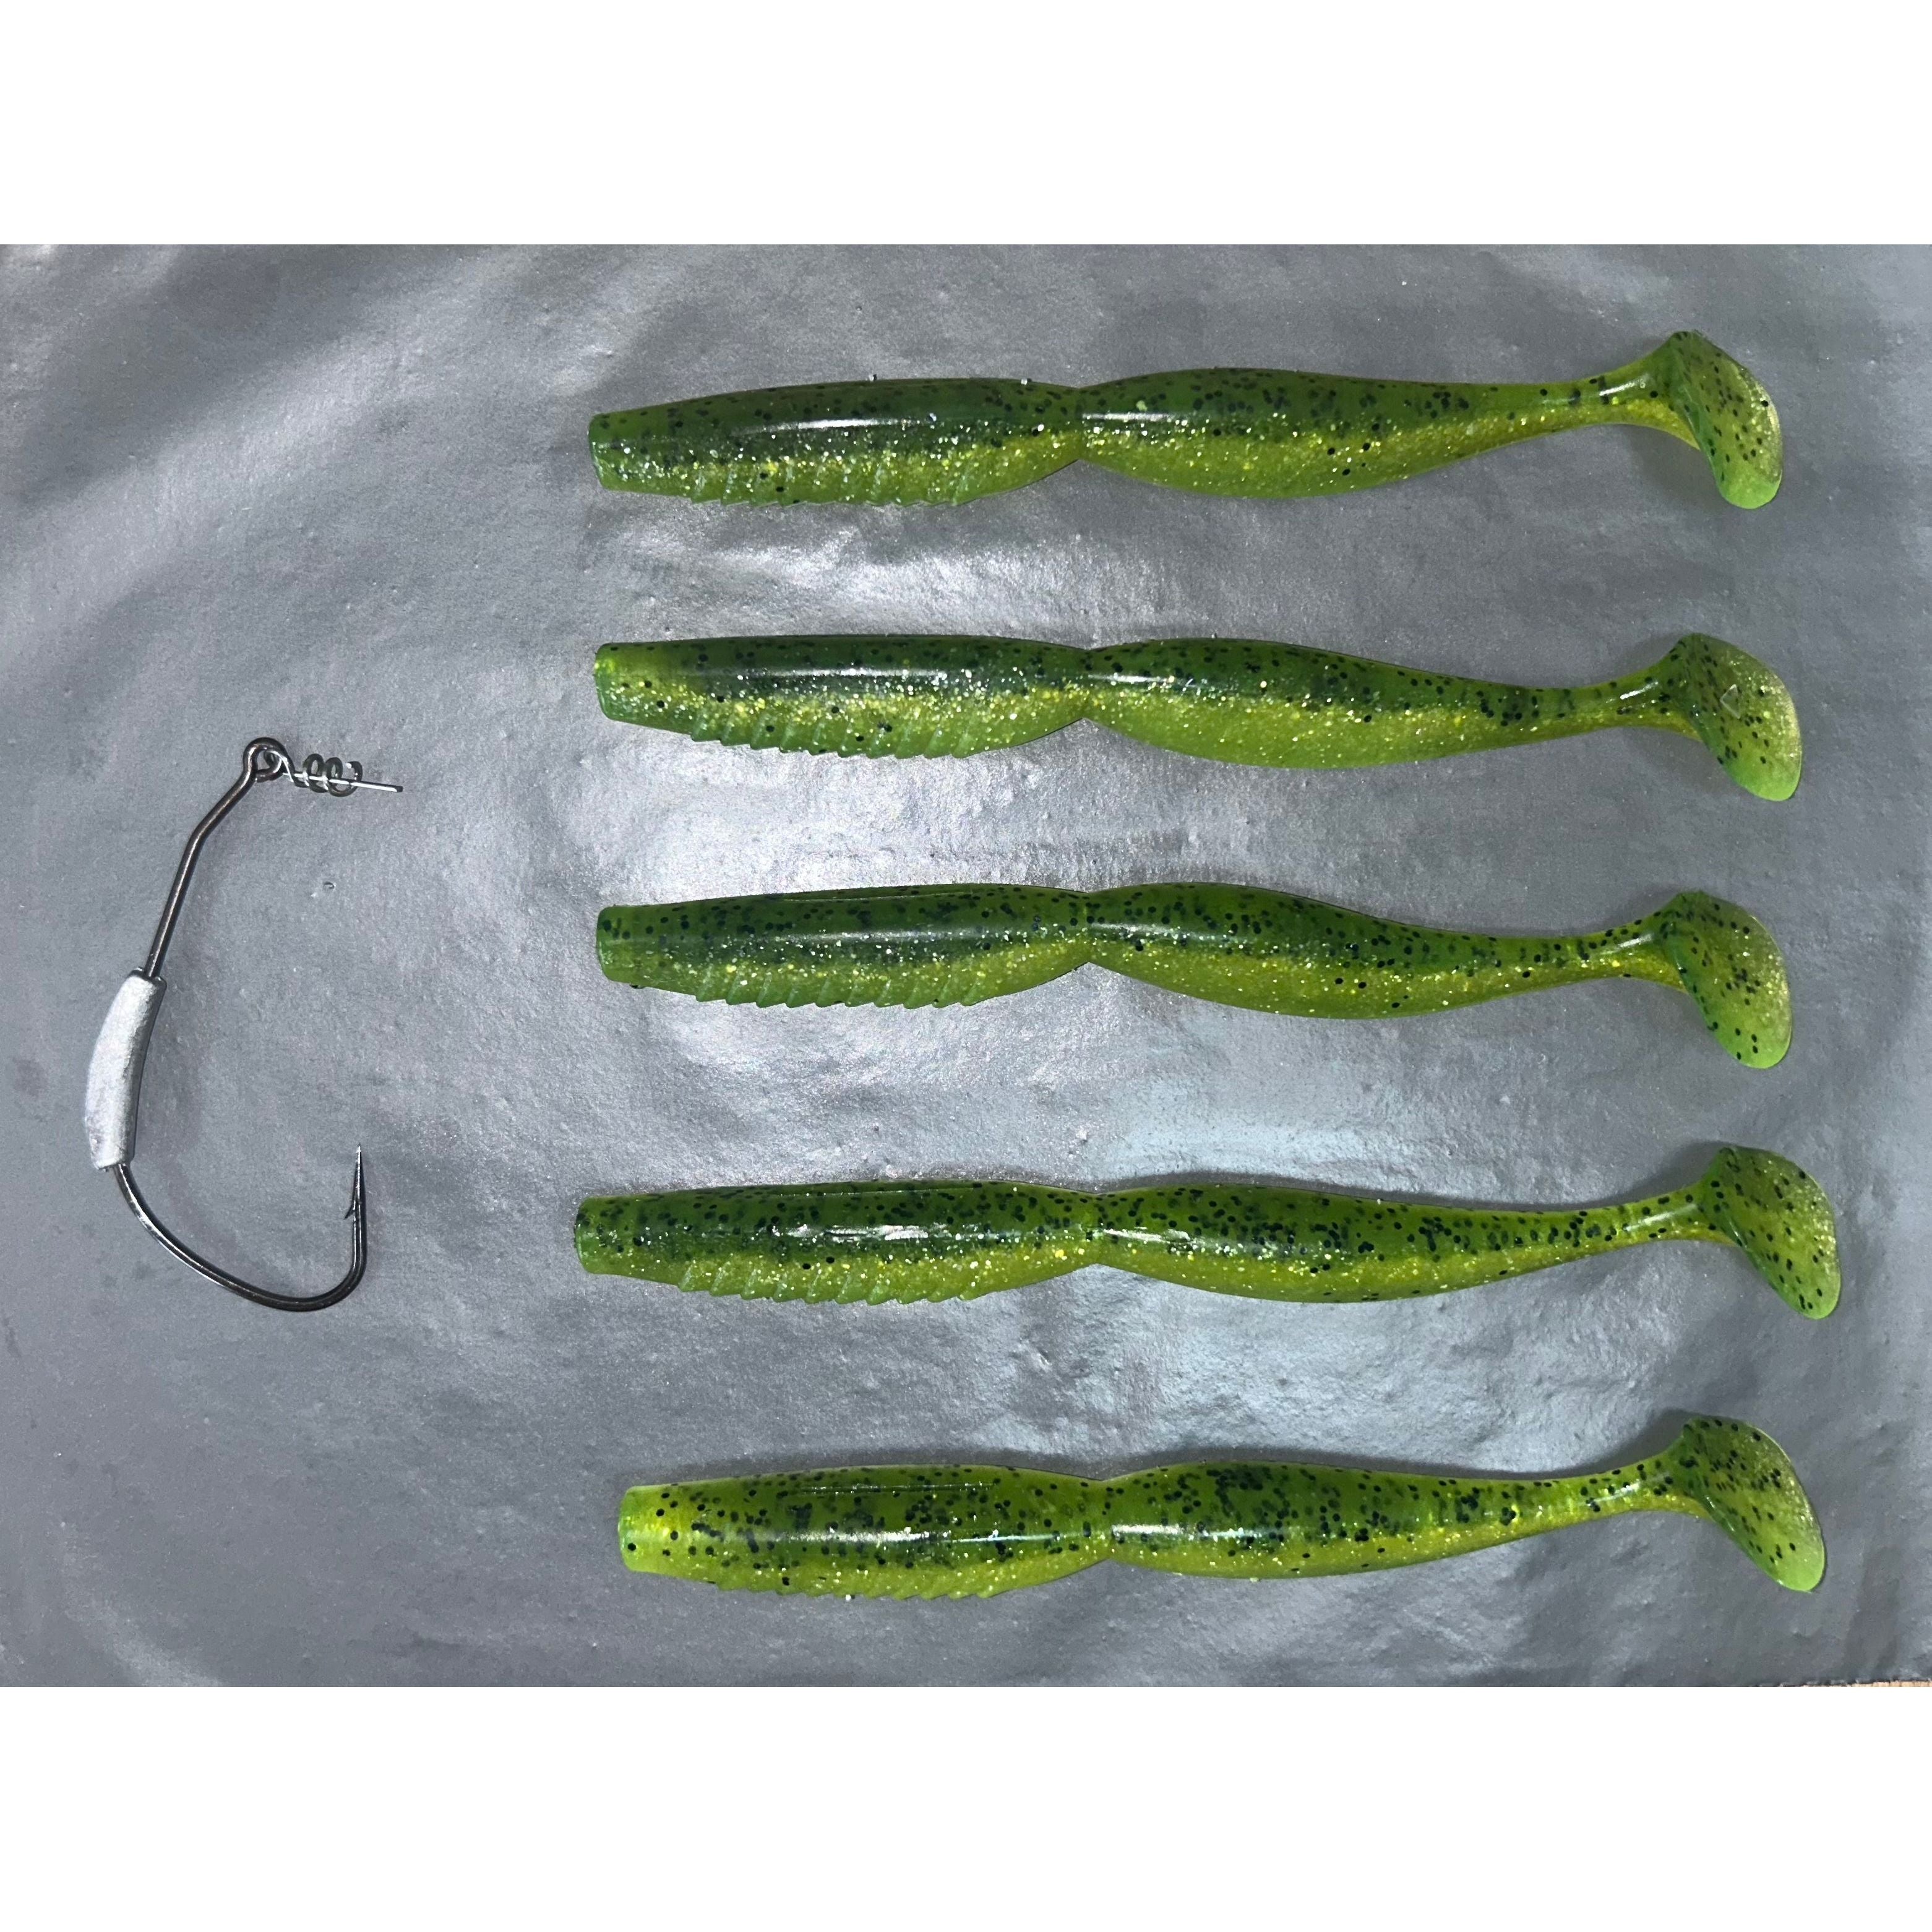 5” Spindle Paddletail Spinning Bass Lure Sets